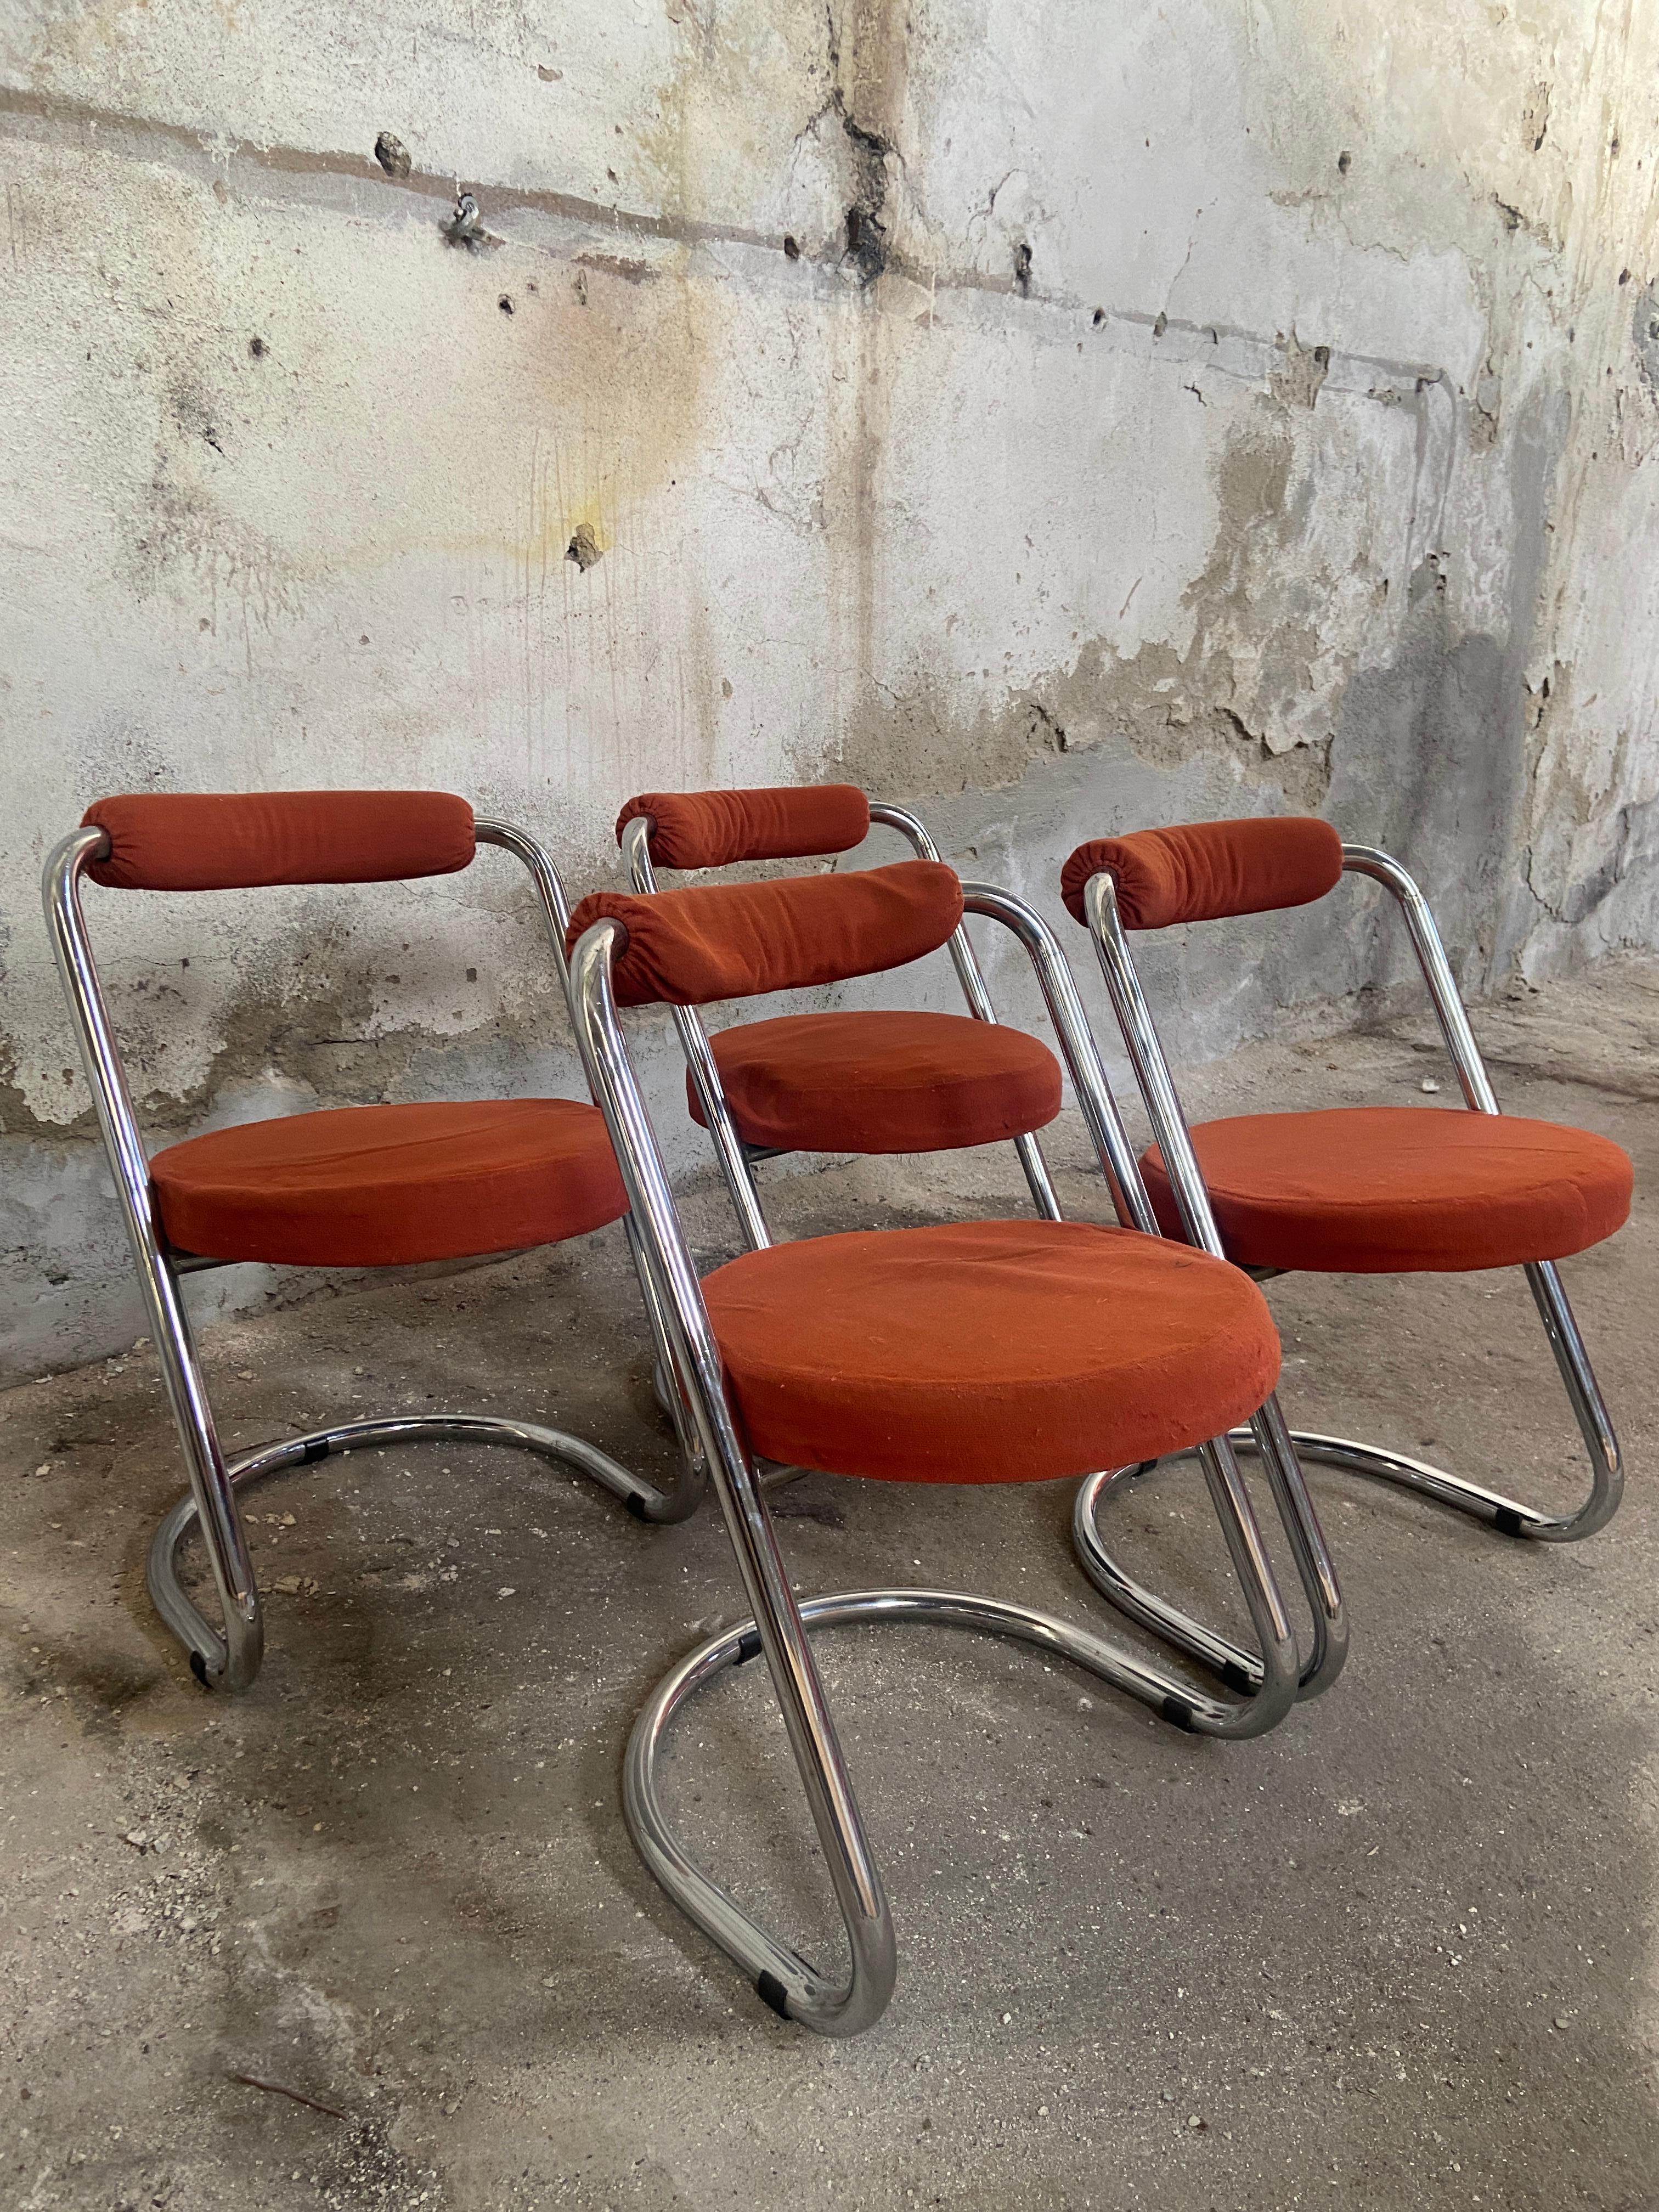 Mid-Century Modern Italian set of Giotto Stoppino chairs with chrome structure and original fabric apholstery in brick-colored.
If needed the chairs available are 5 pieces.
The fabric shows clear signs of wear and tear and should be replaced.